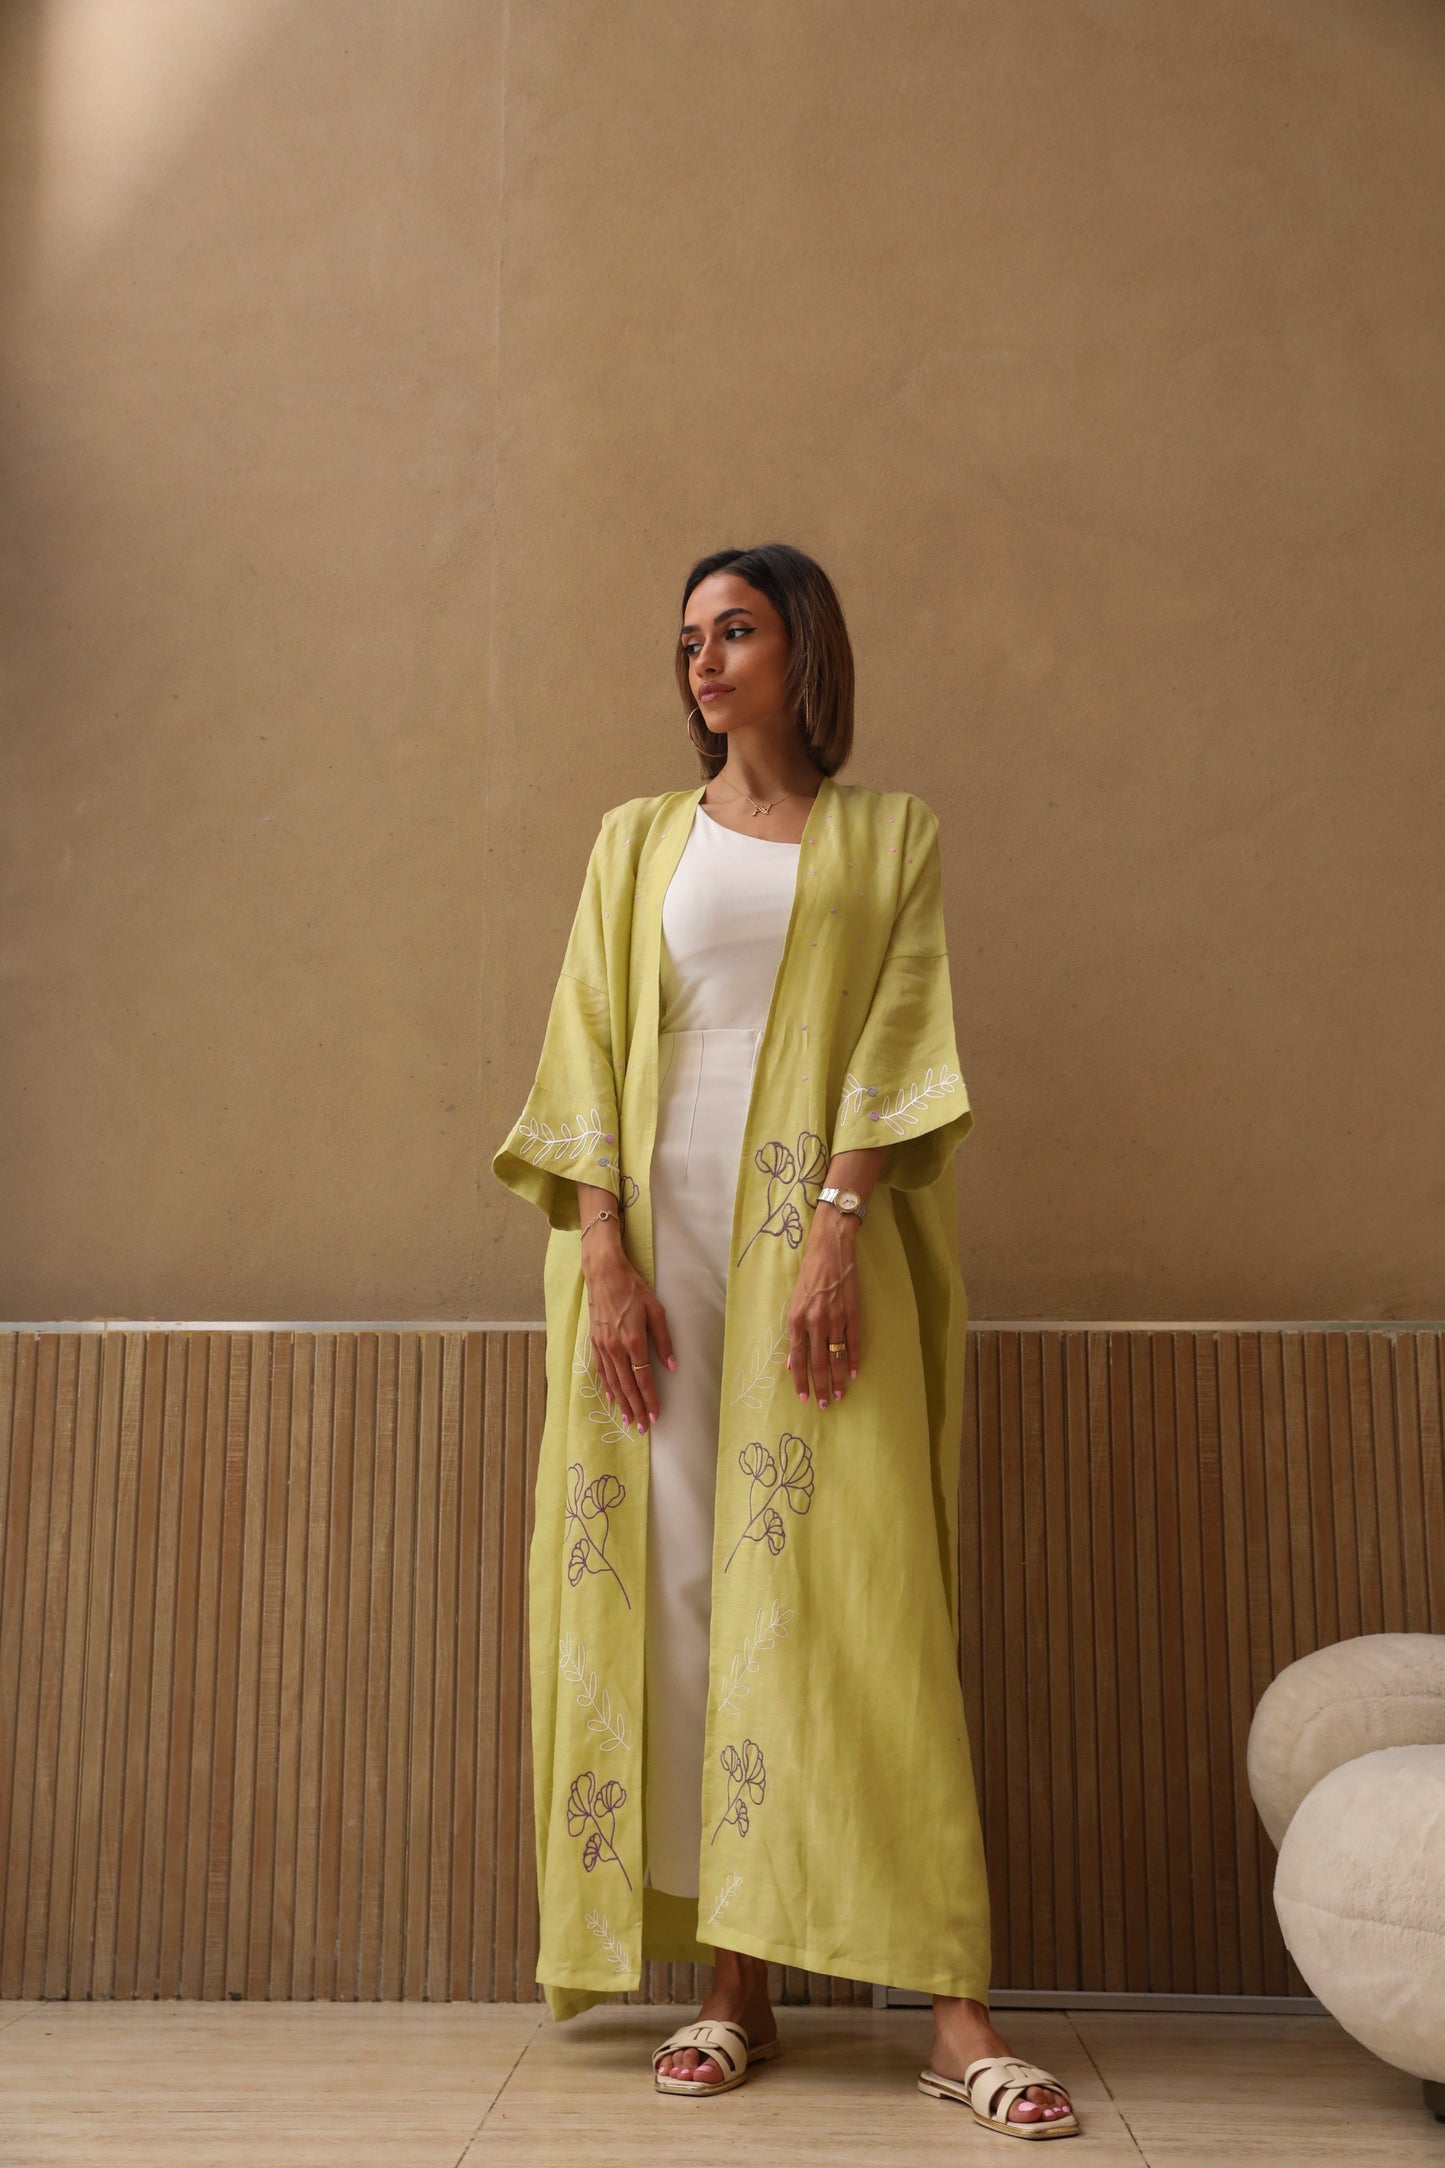 Load image into Gallery viewer, I Need a Yellow Abaya - Embroidered Linen - Online Shopping - The Untitled Project
